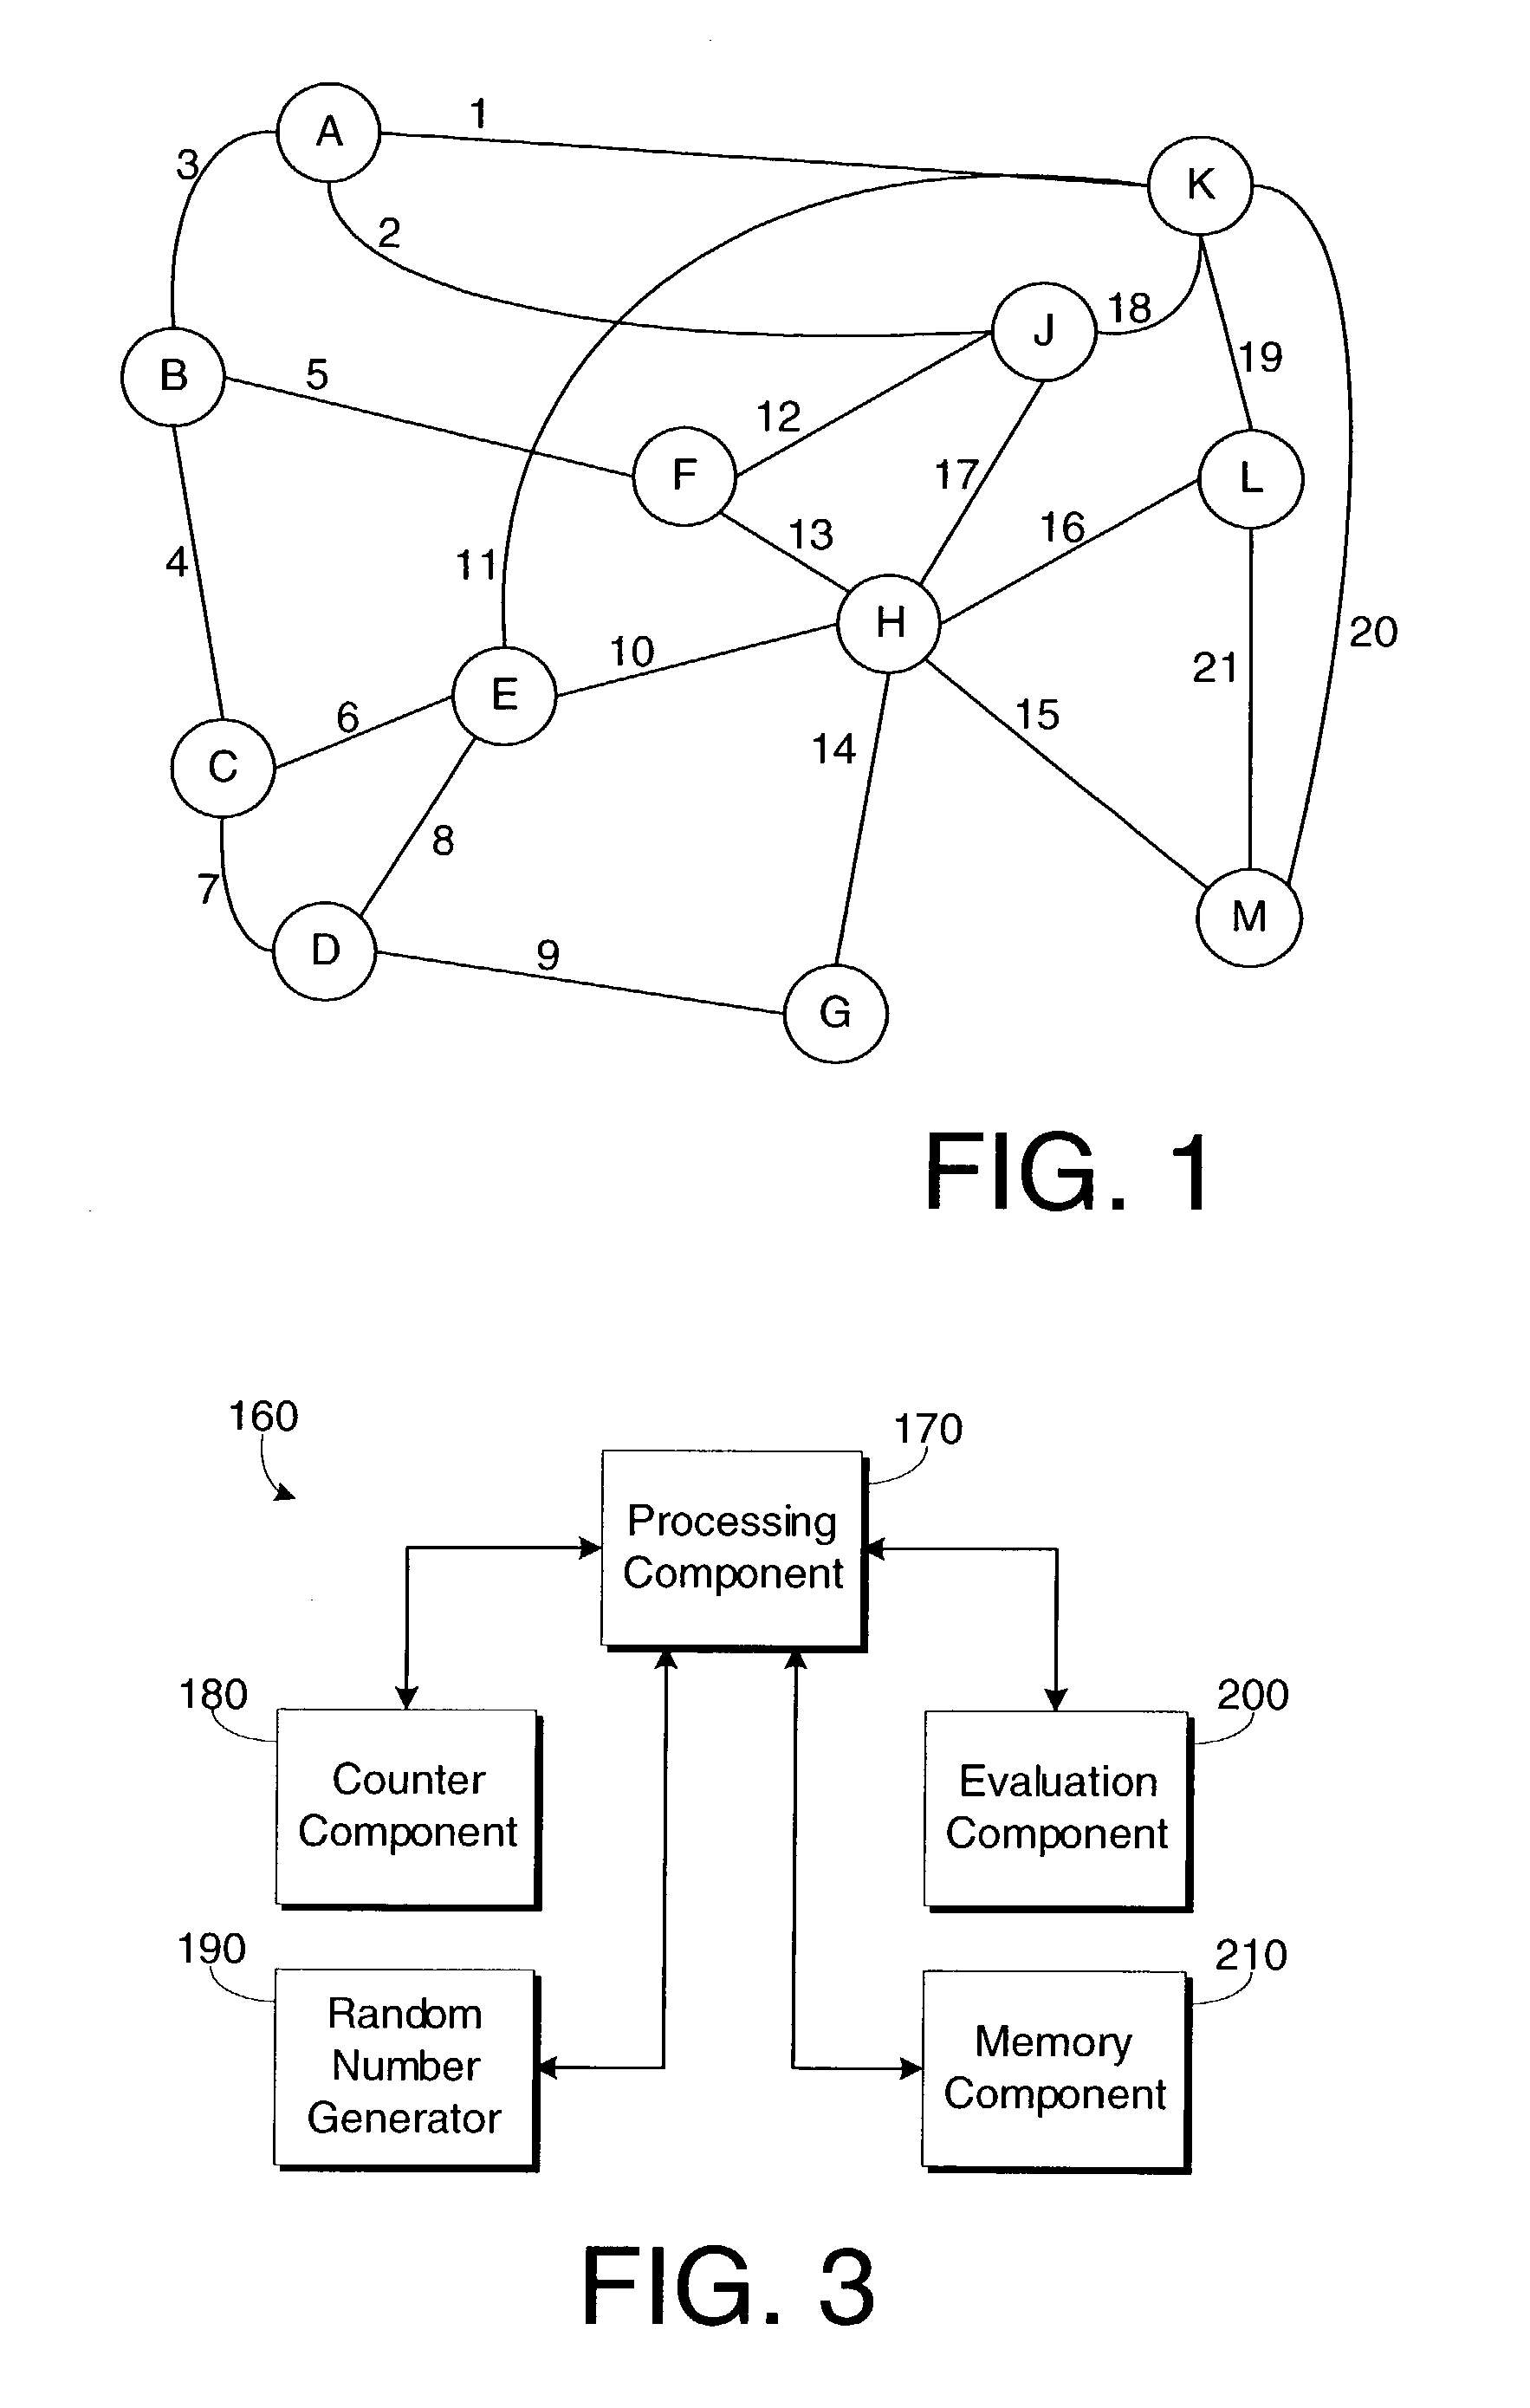 Method for assigning link weights in a communications network